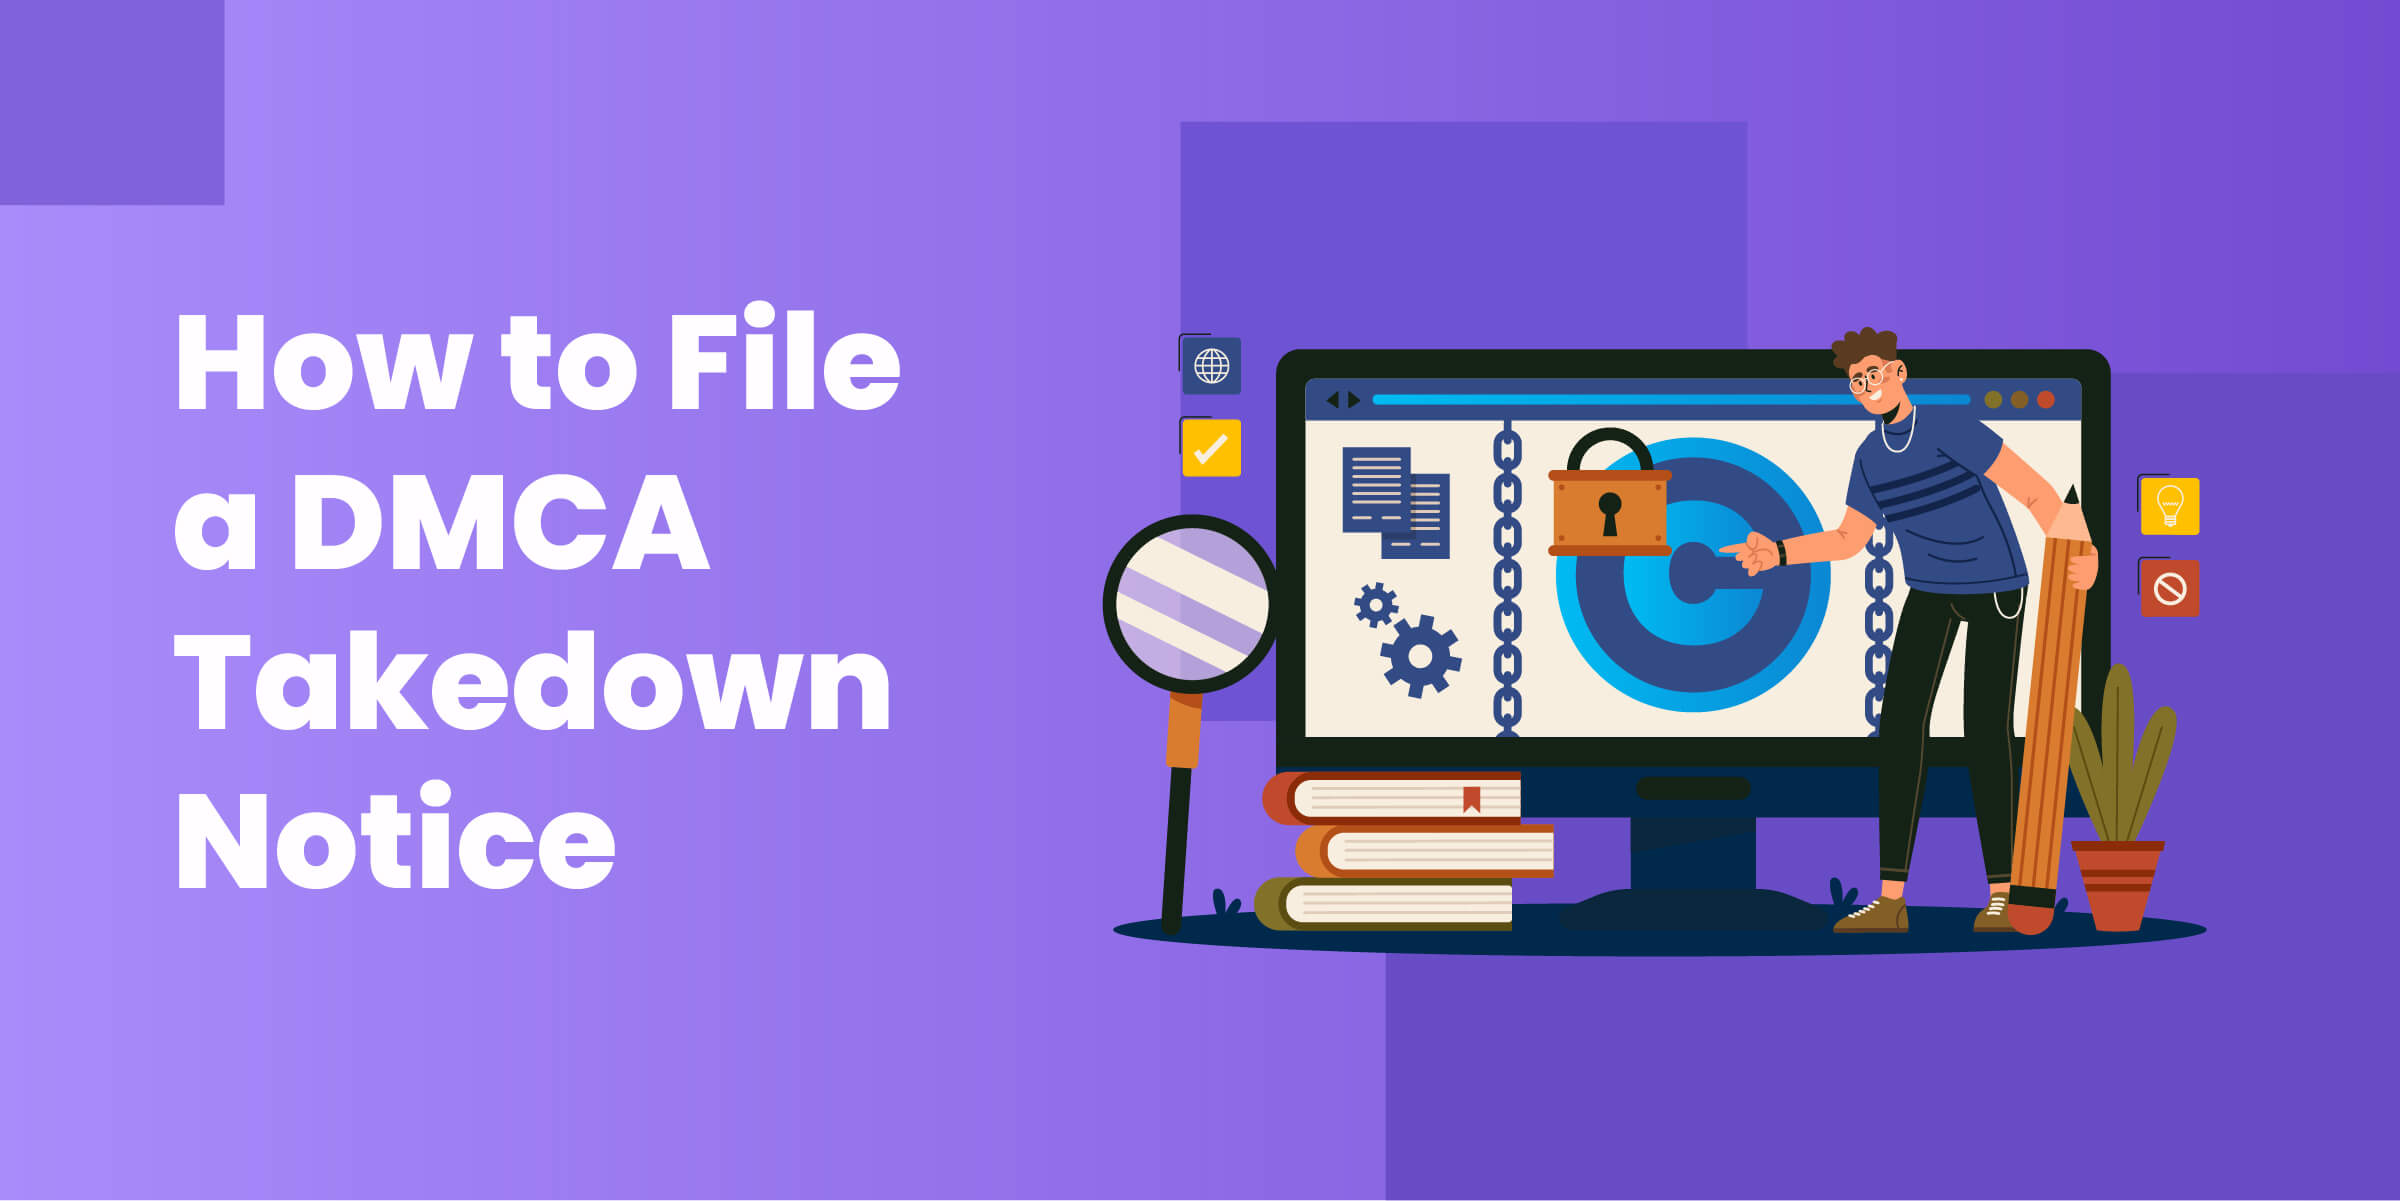 How to File DMCA Takedown